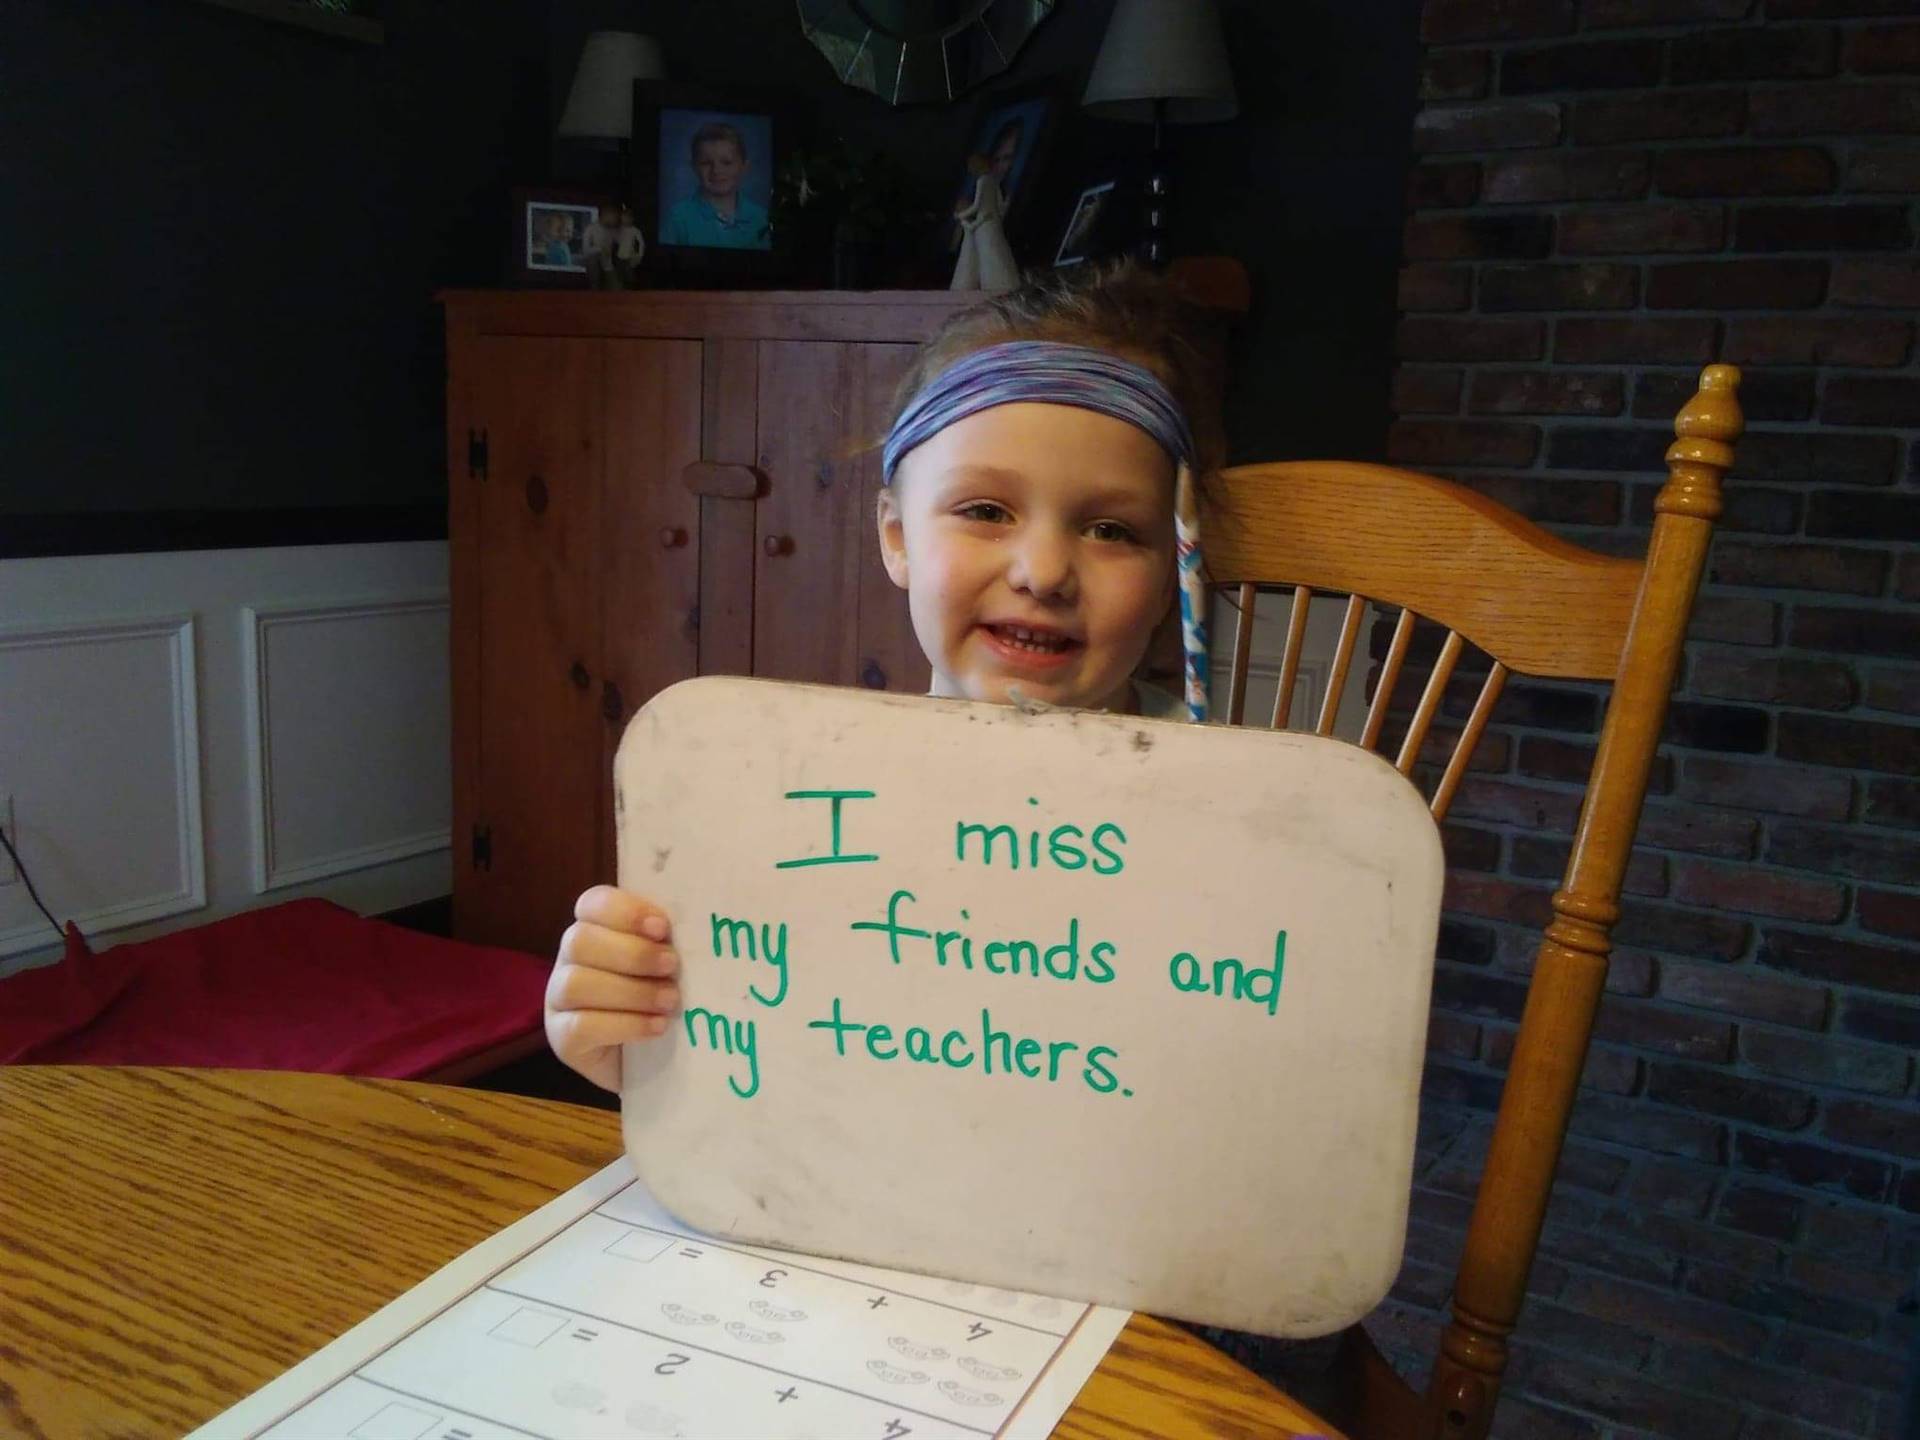 kid with "i miss my friends and teachers" sign